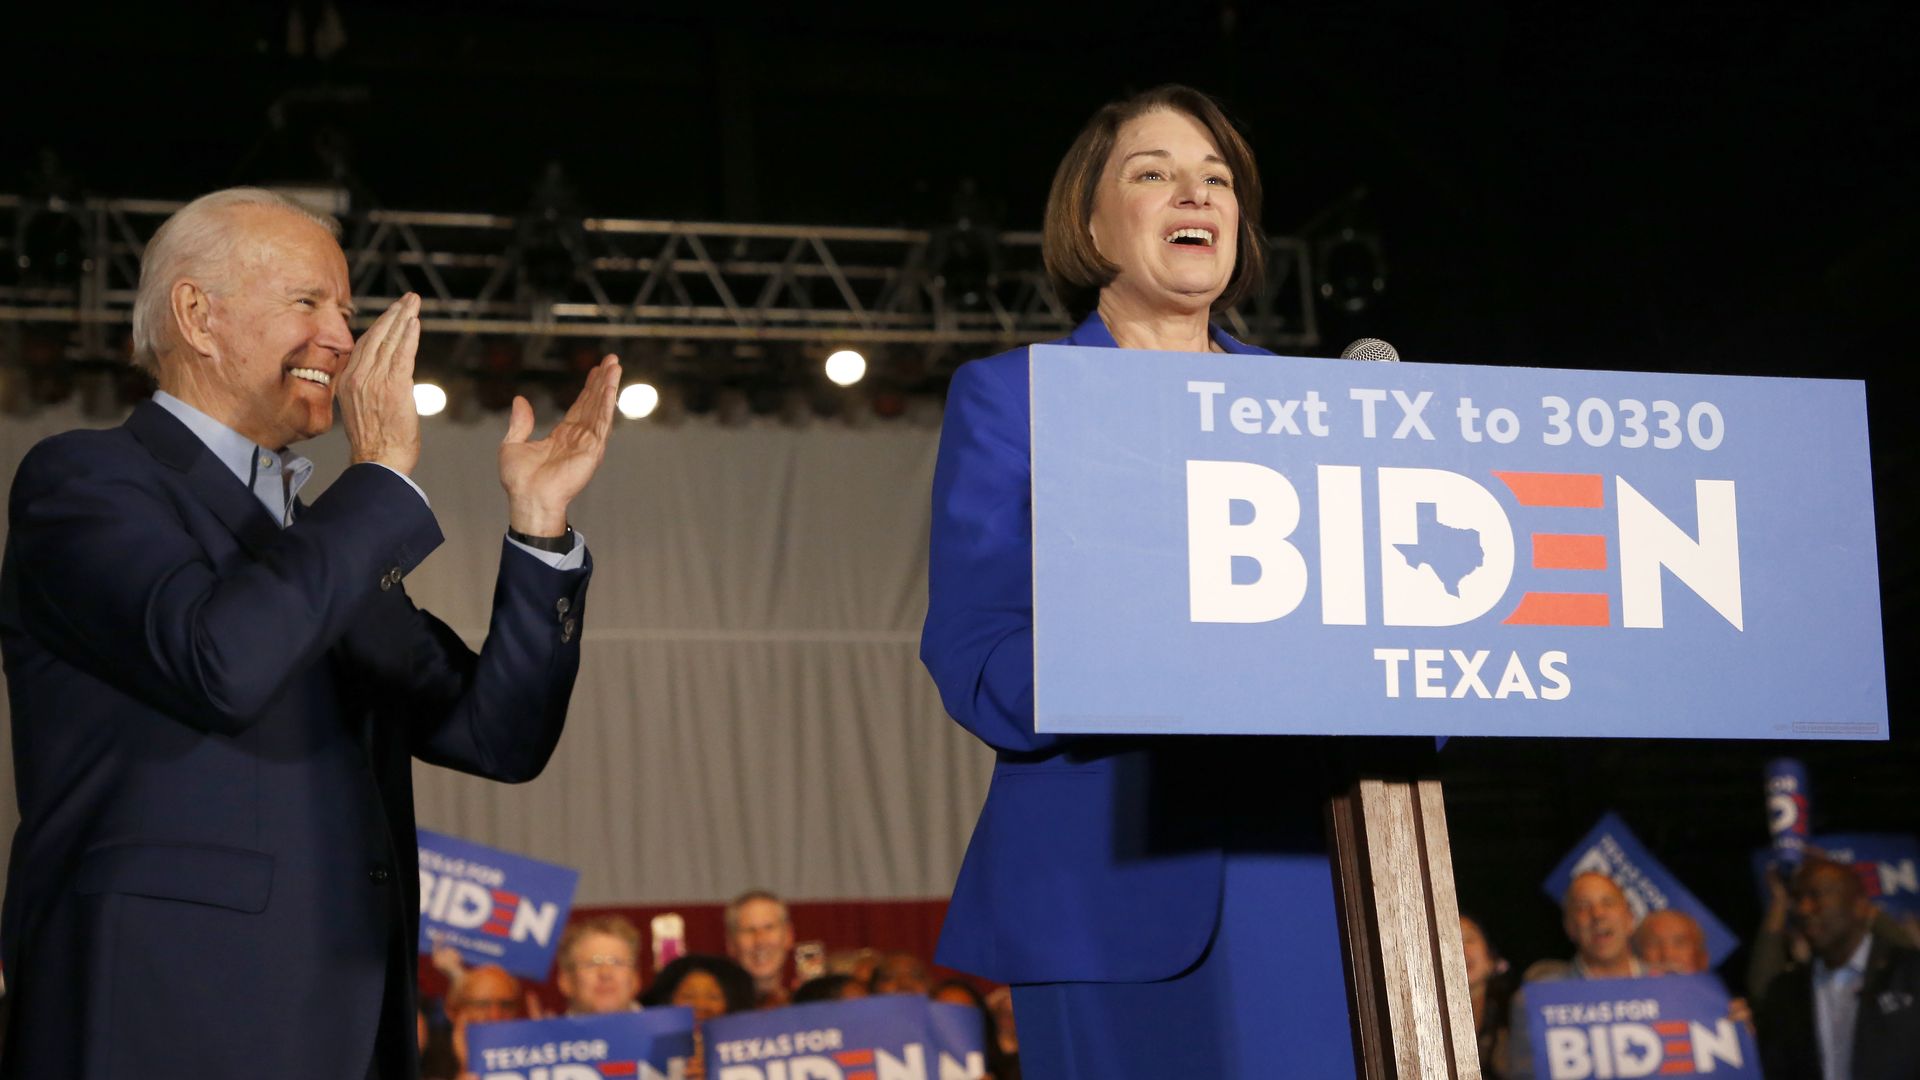 Democratic presidential candidate former Vice President Joe Biden is joined on stage by Sen. Amy Klobuchar (D-MN) during a campaign event on March 2, 2020 in Dallas, Texas